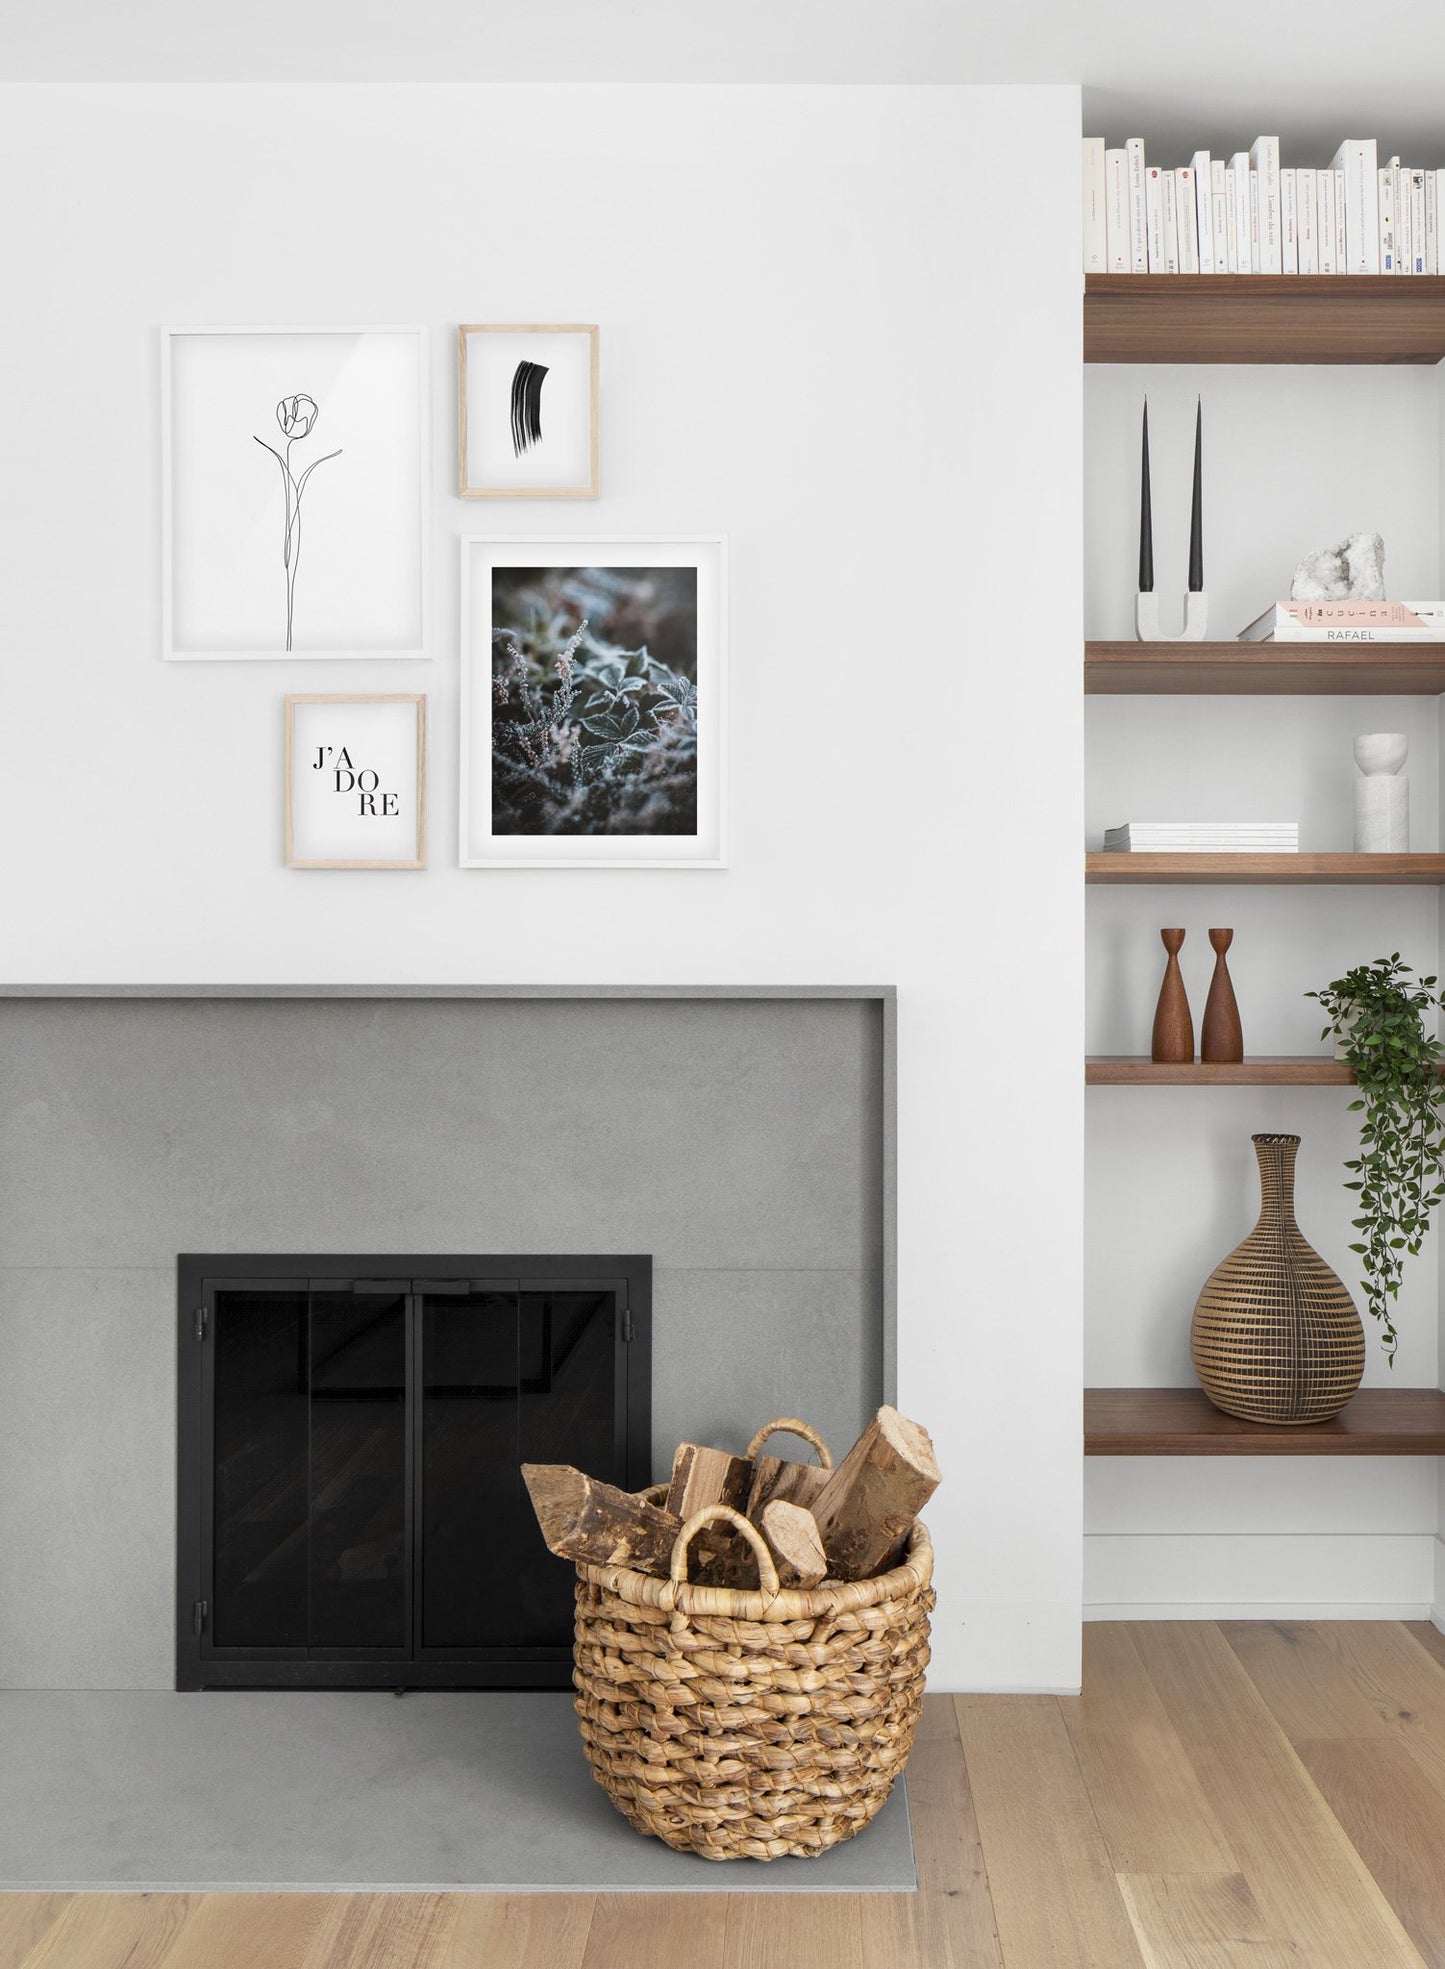 Winter flowers modern minimalist photography poster by Opposite Wall - Living room with fireplace